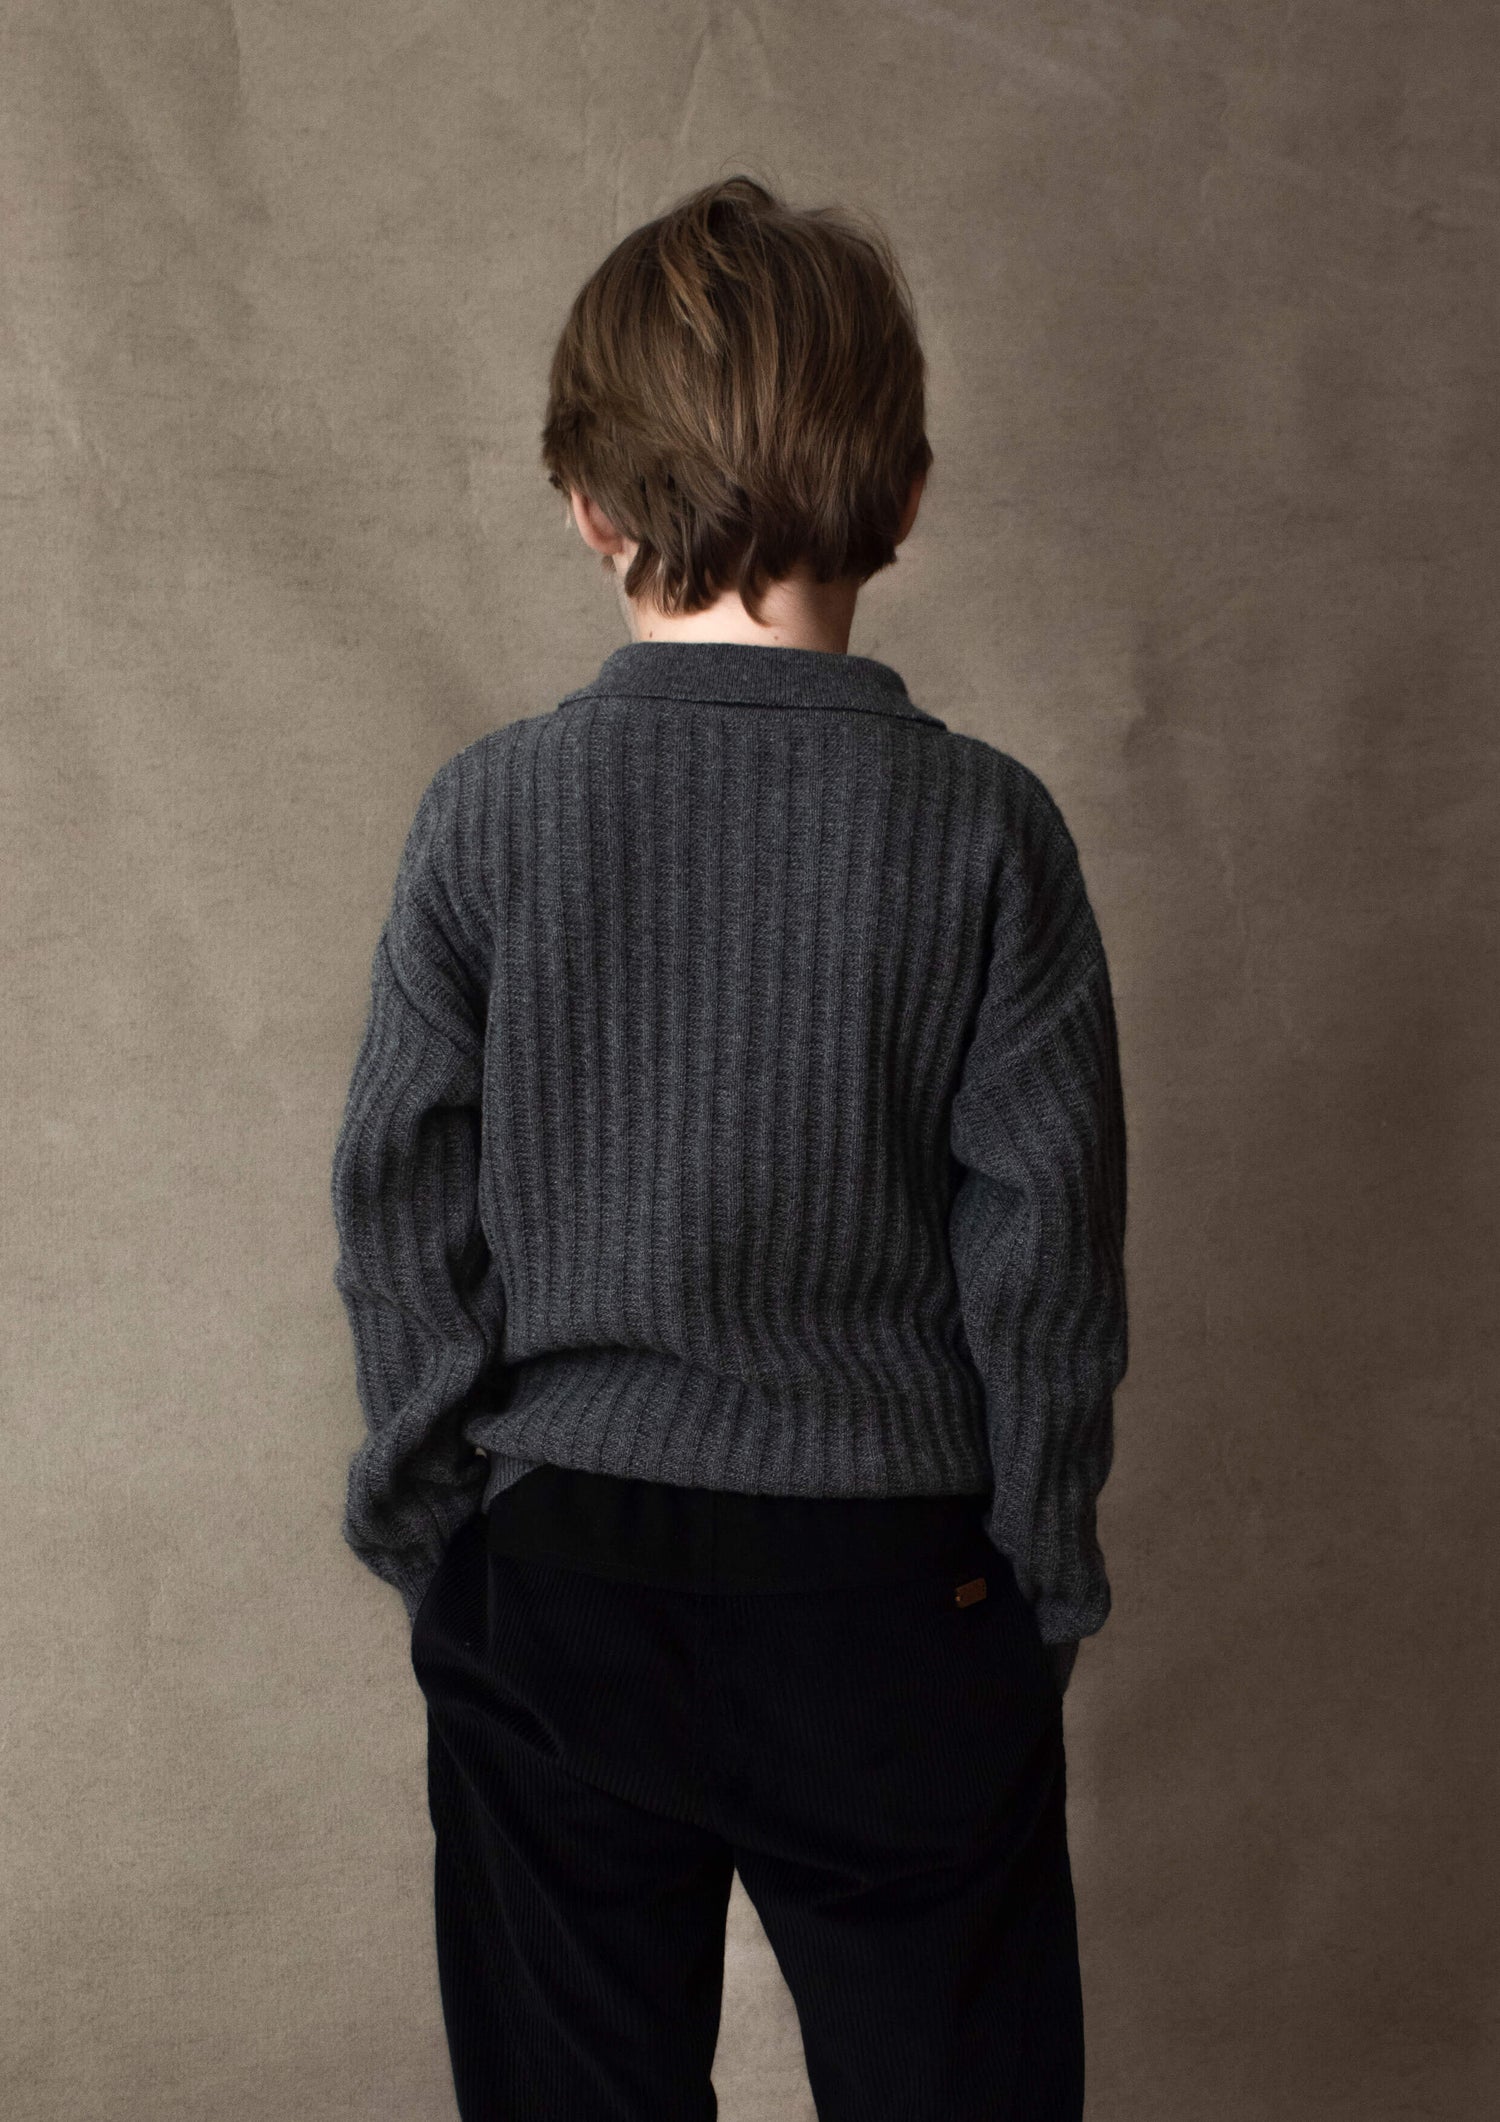 Popelin Grey Knitted Polo Sweater